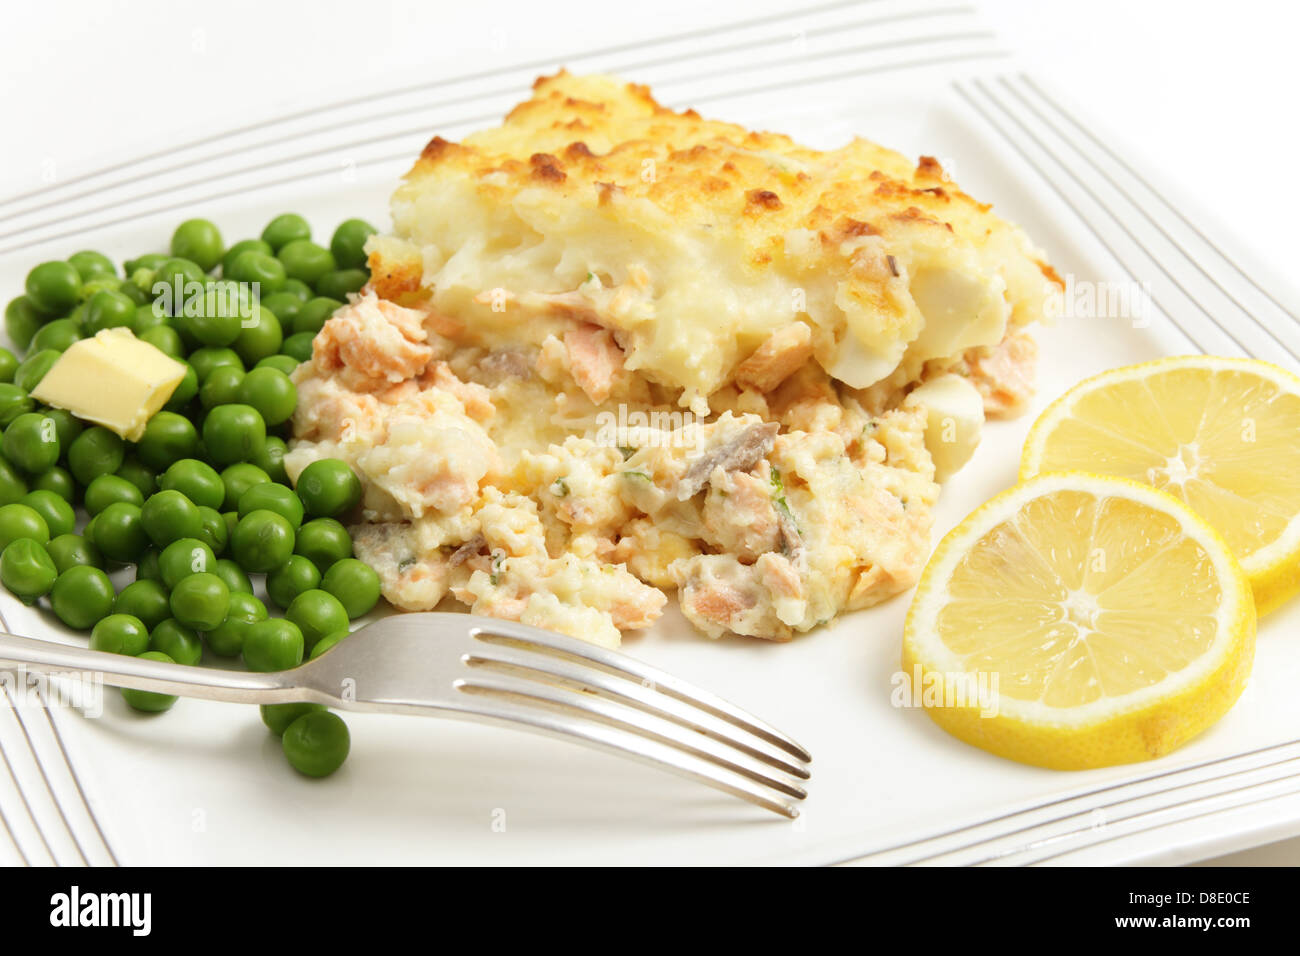 Homemade salmon, egg and potato pie, served with boiled peas and garnished with slices of lemon Stock Photo